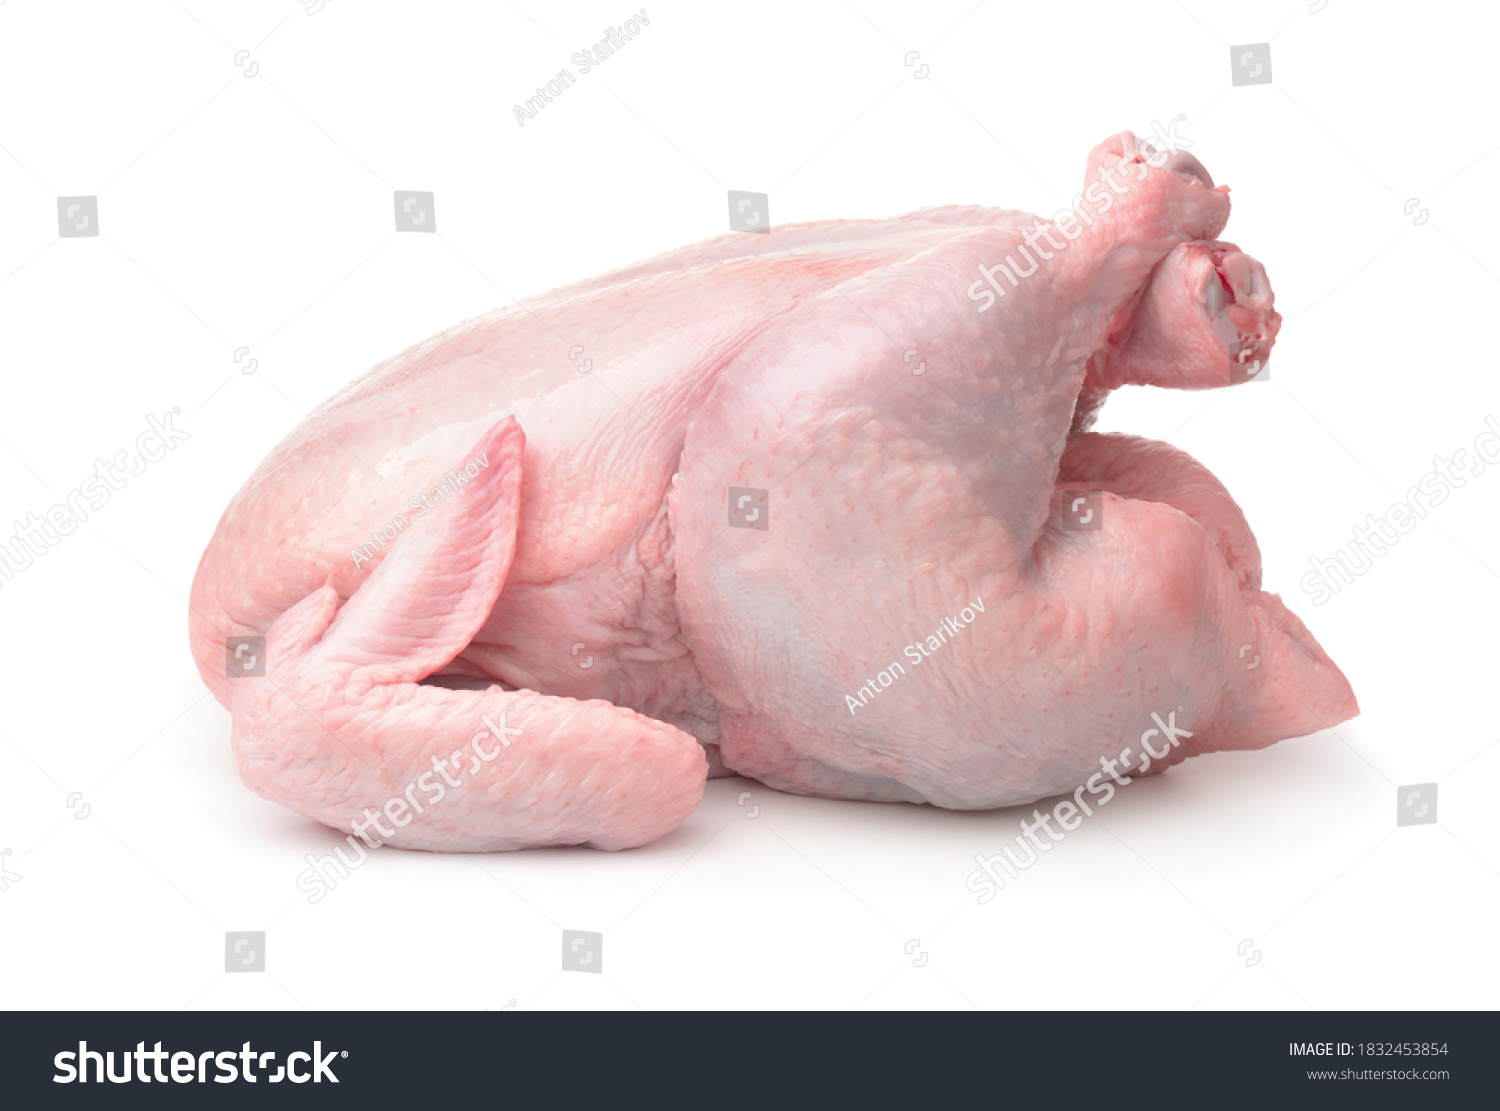 Side view of whole raw chicken isolated on white #1832453854